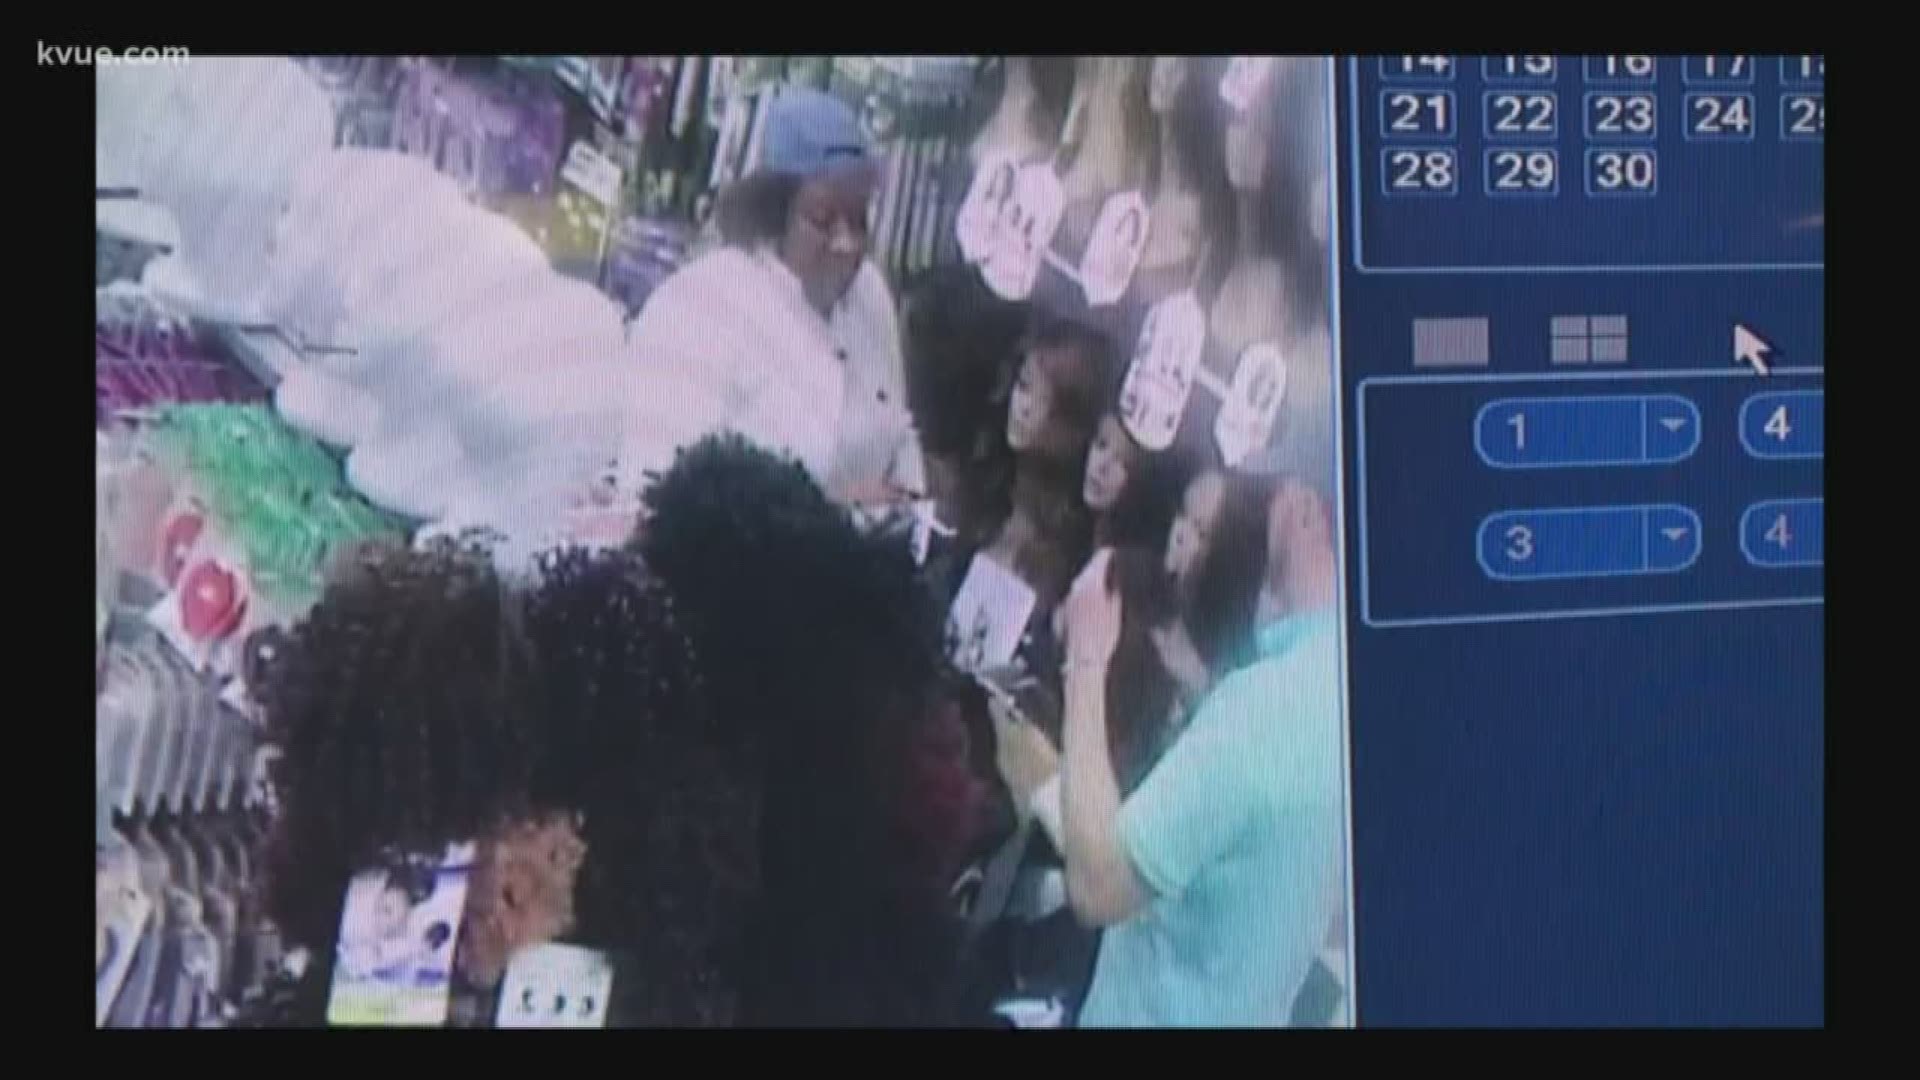 The duo were caught on camera in the act at the Round Rock Beauty Supply earlier this month.